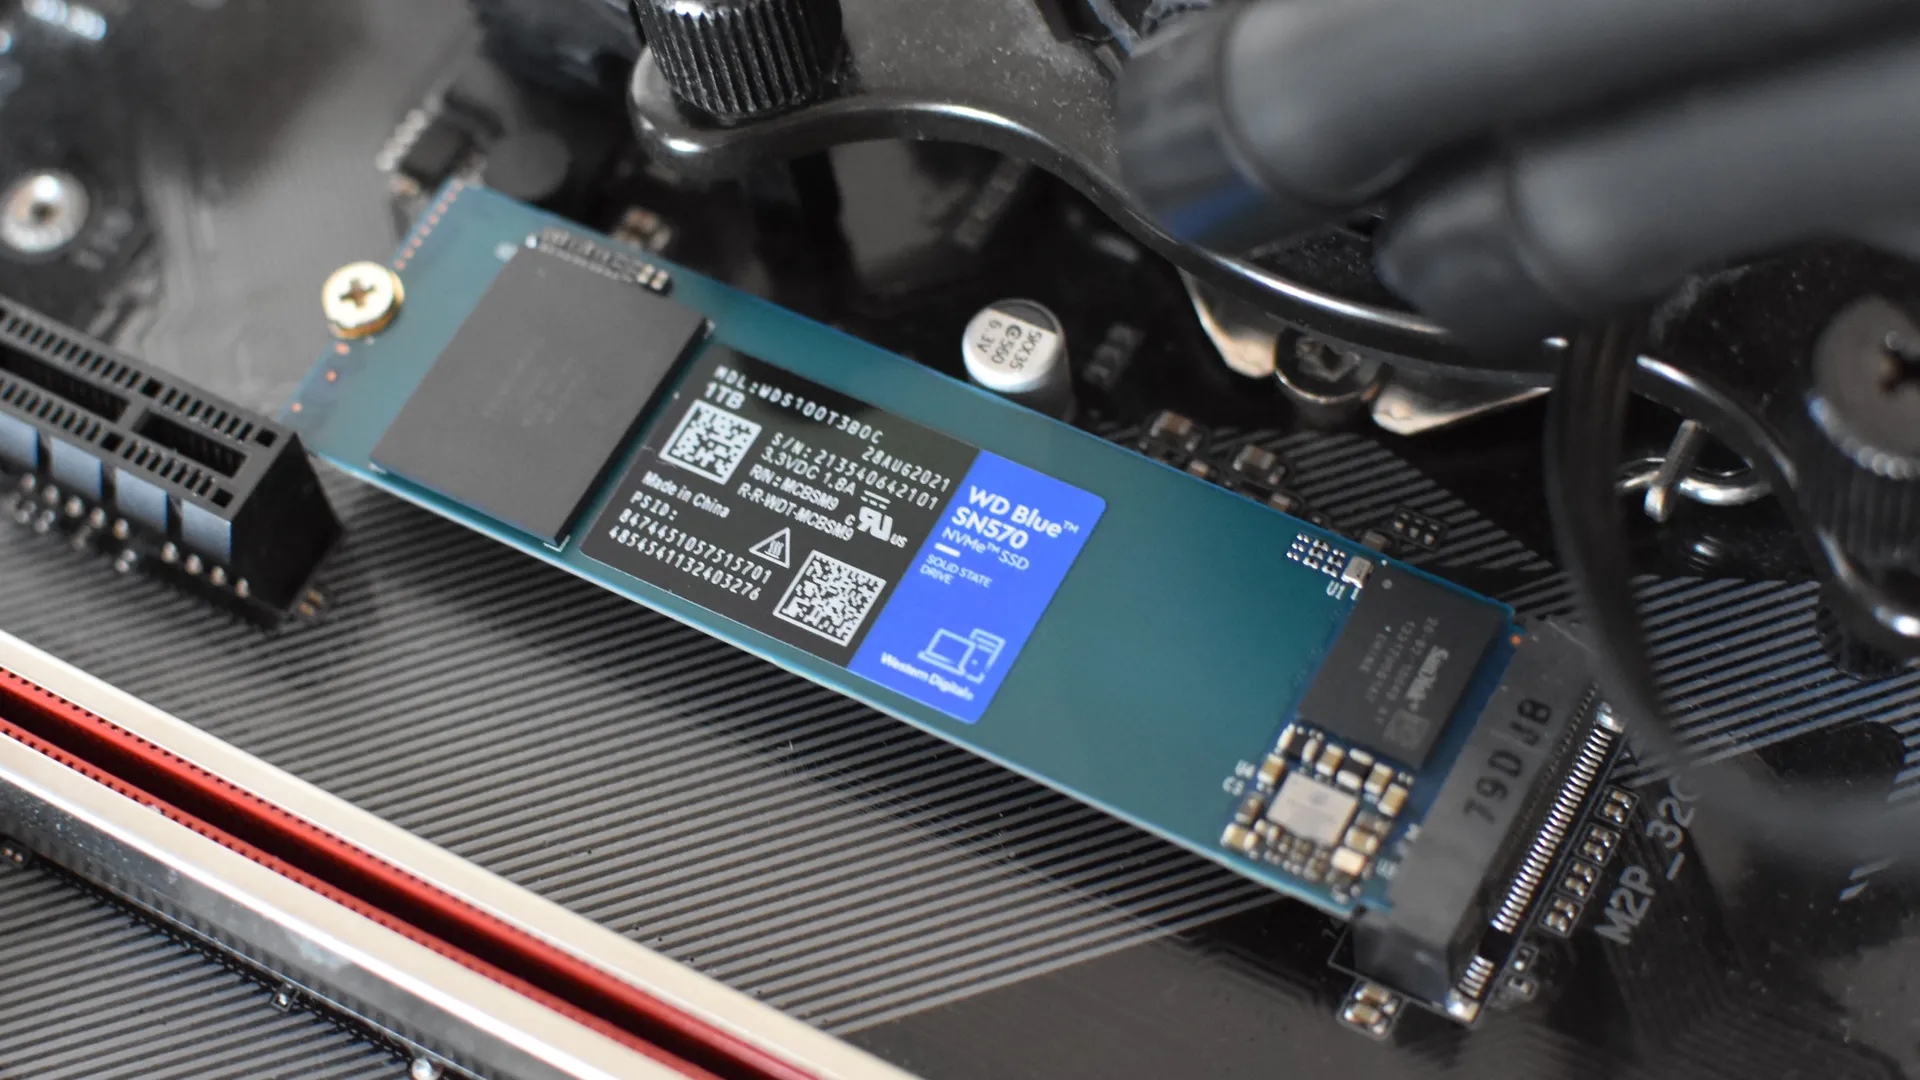 How To Install A SSD Hard Drive M.2 2280 Solid State Drive